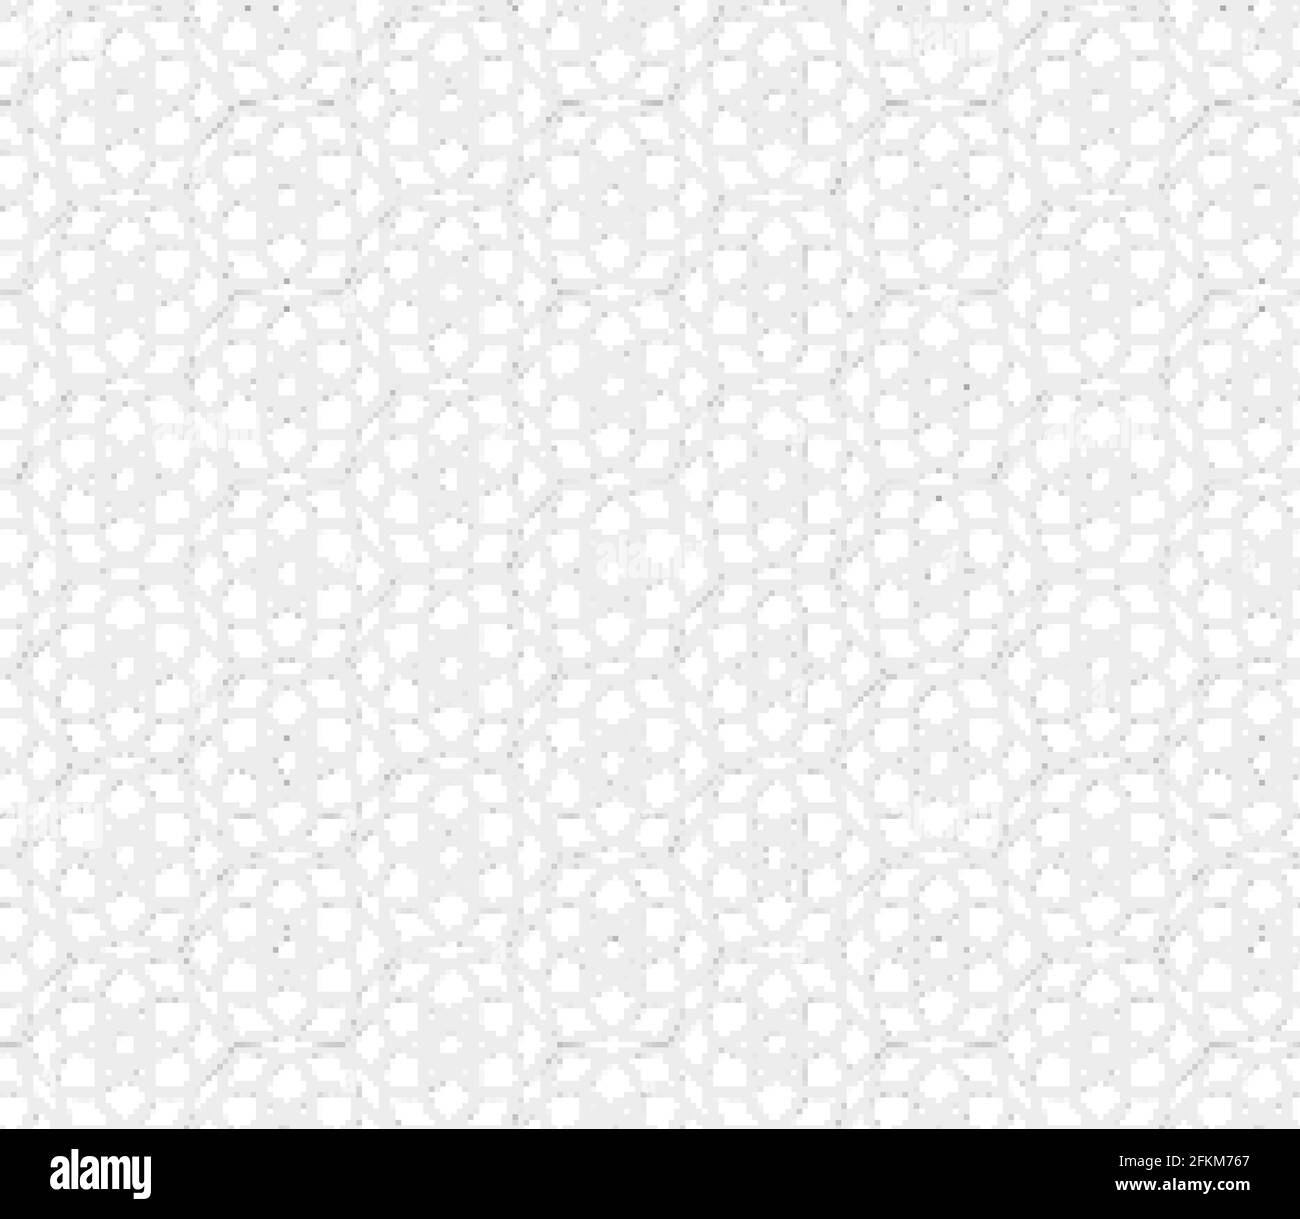 Floral Seamless Lace Pattern , Vectors